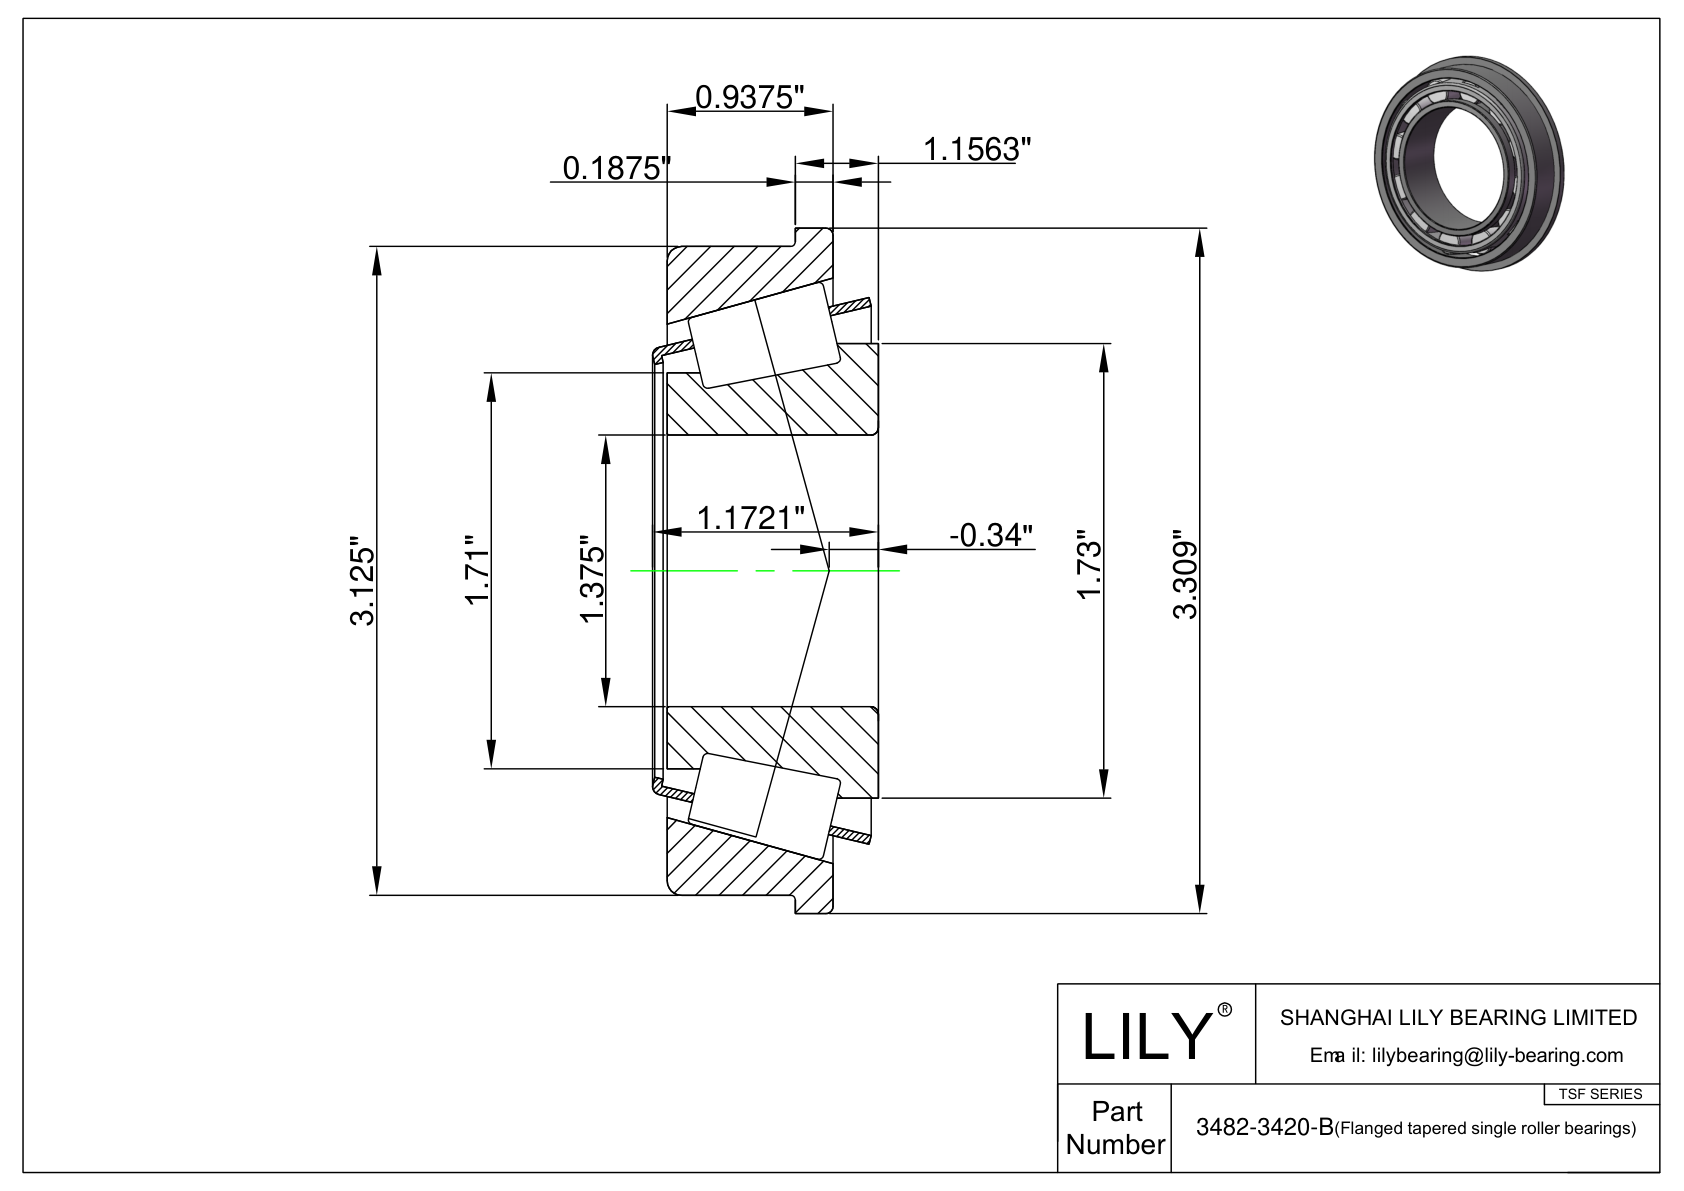 3482-3420-B TSF (Tapered Single Roller Bearings with Flange) (Imperial) cad drawing